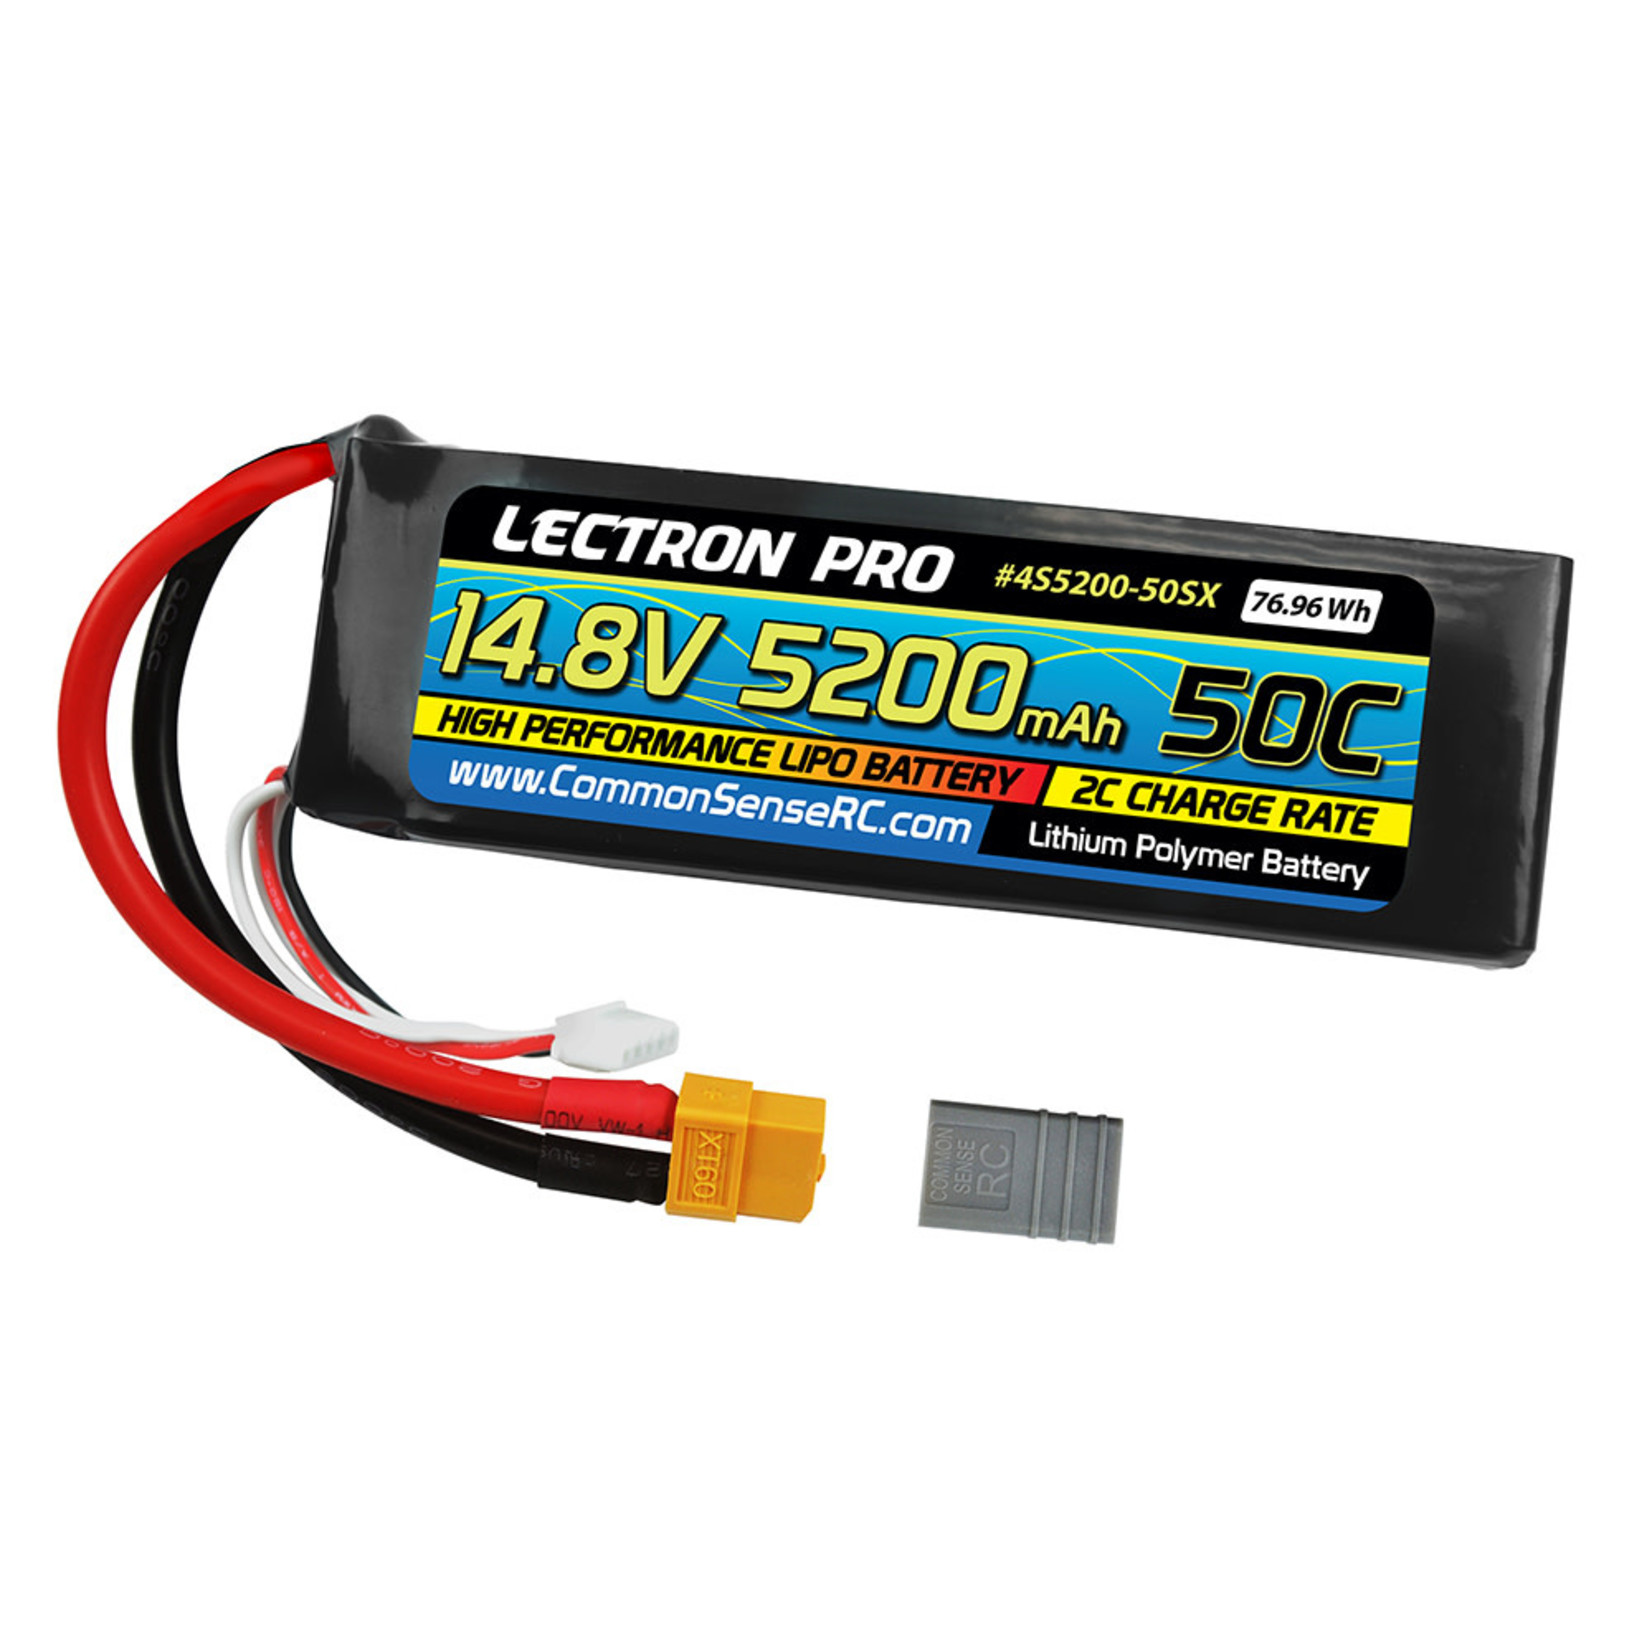 Common Sense RC Common Sense RC Lectron Pro 14.8V 5200mAh 50C Lipo Battery Soft Pack with XT60 Connector + CSRC adapter for XT60 batteries to popular RC vehicles #4S5200-50SX